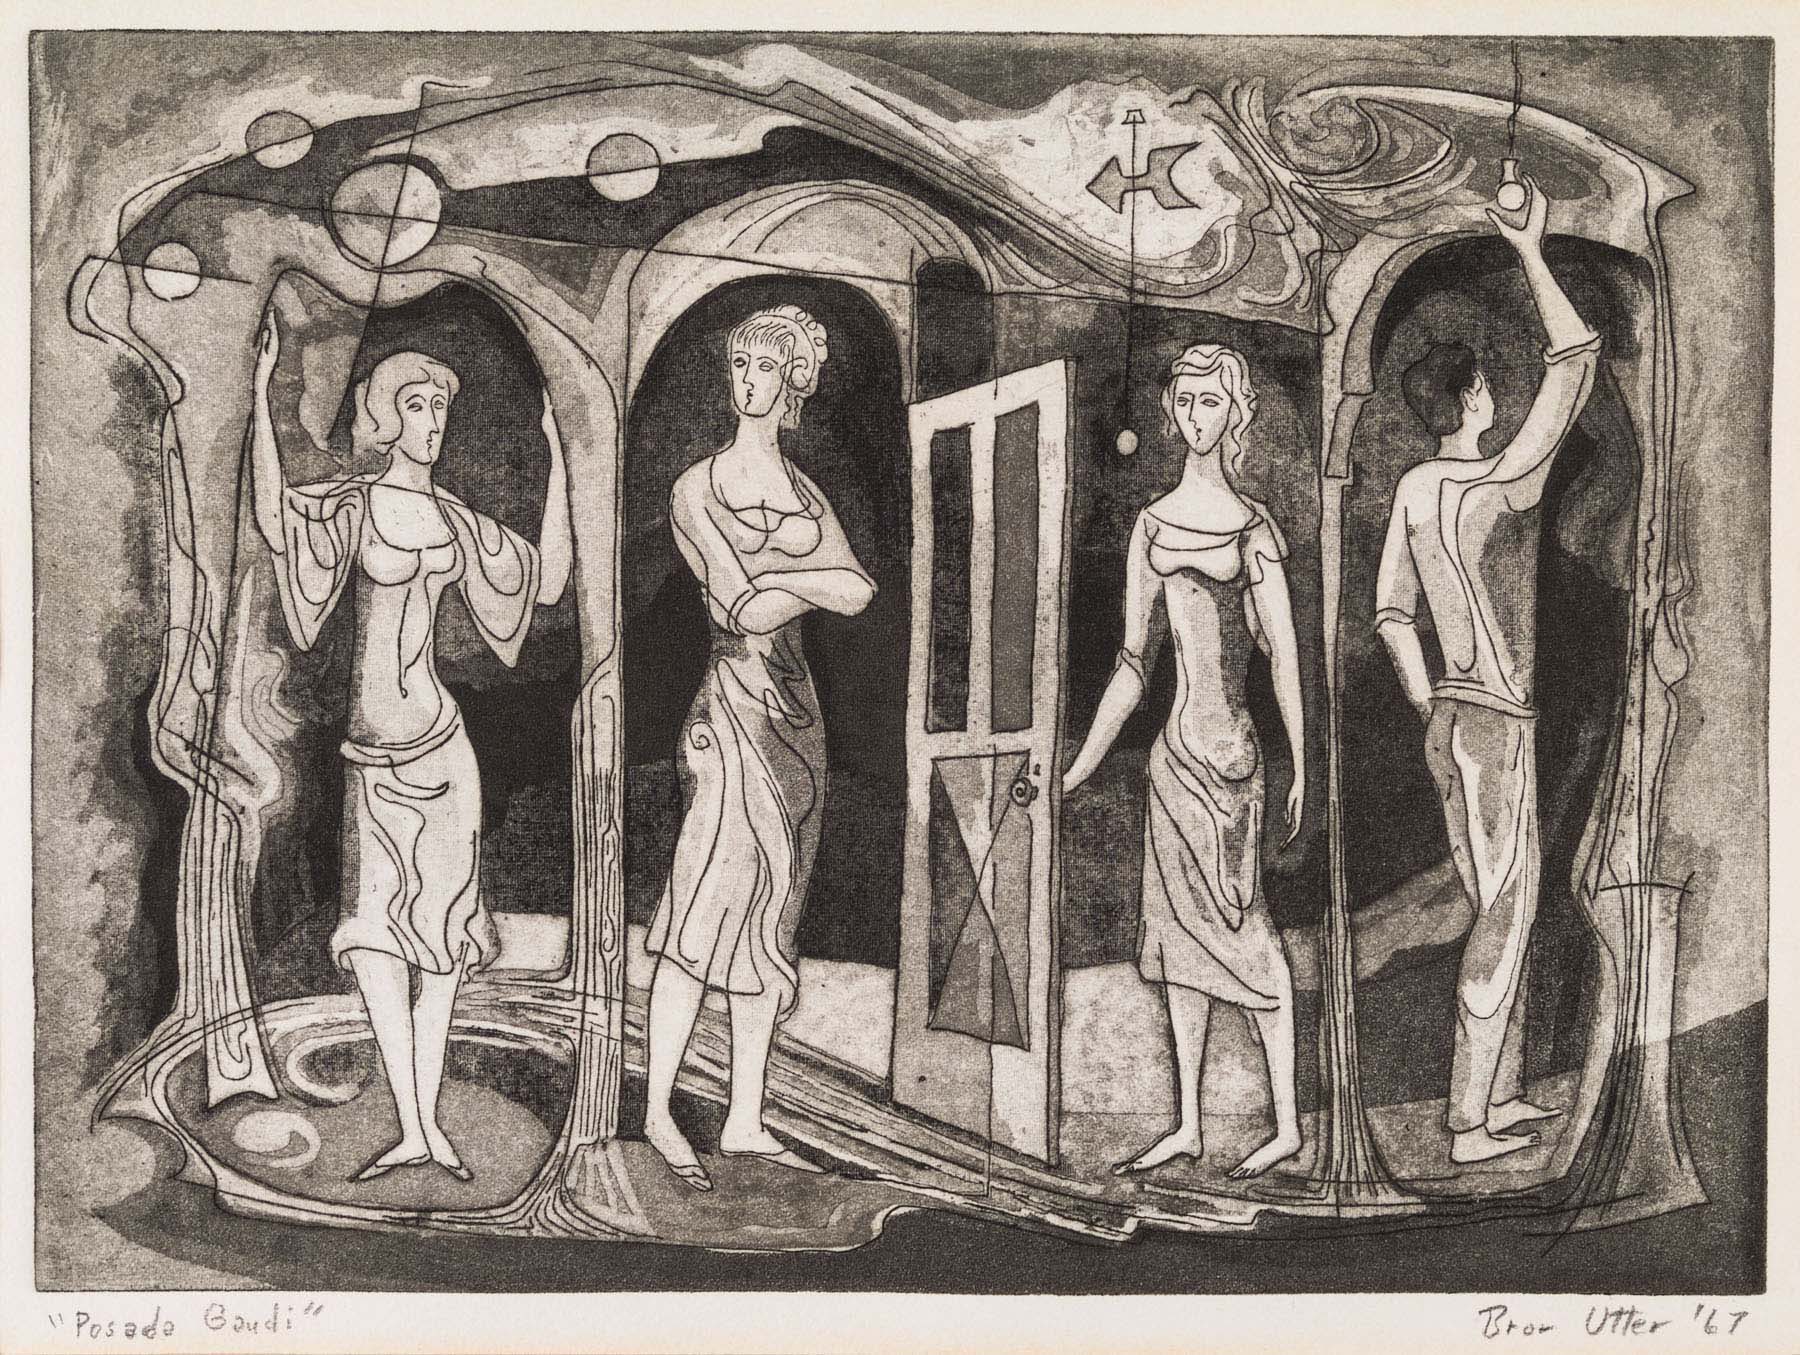 Black-and-white print of four human figures standing in an abstracted interior setting.